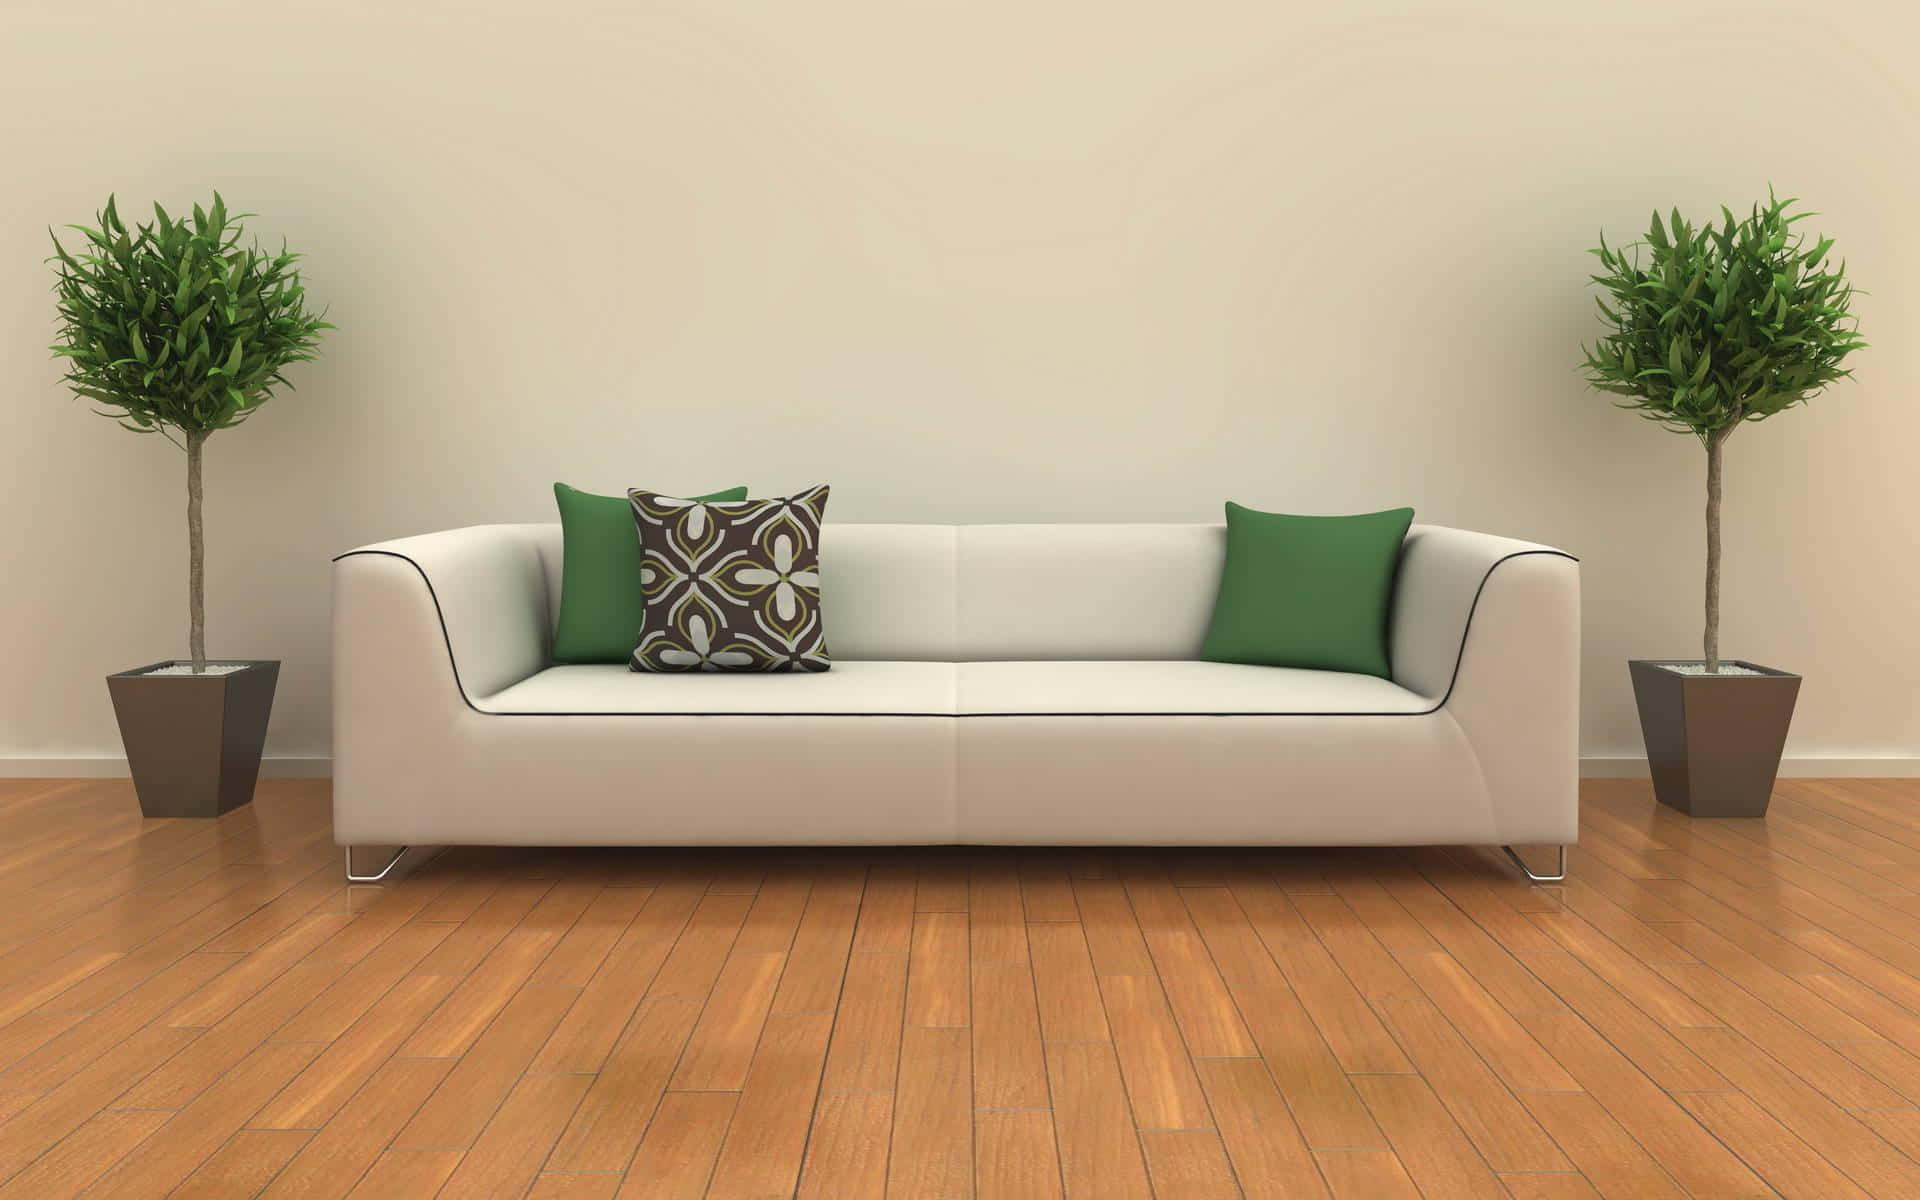 Couch 1920 X 1200 Wallpaper